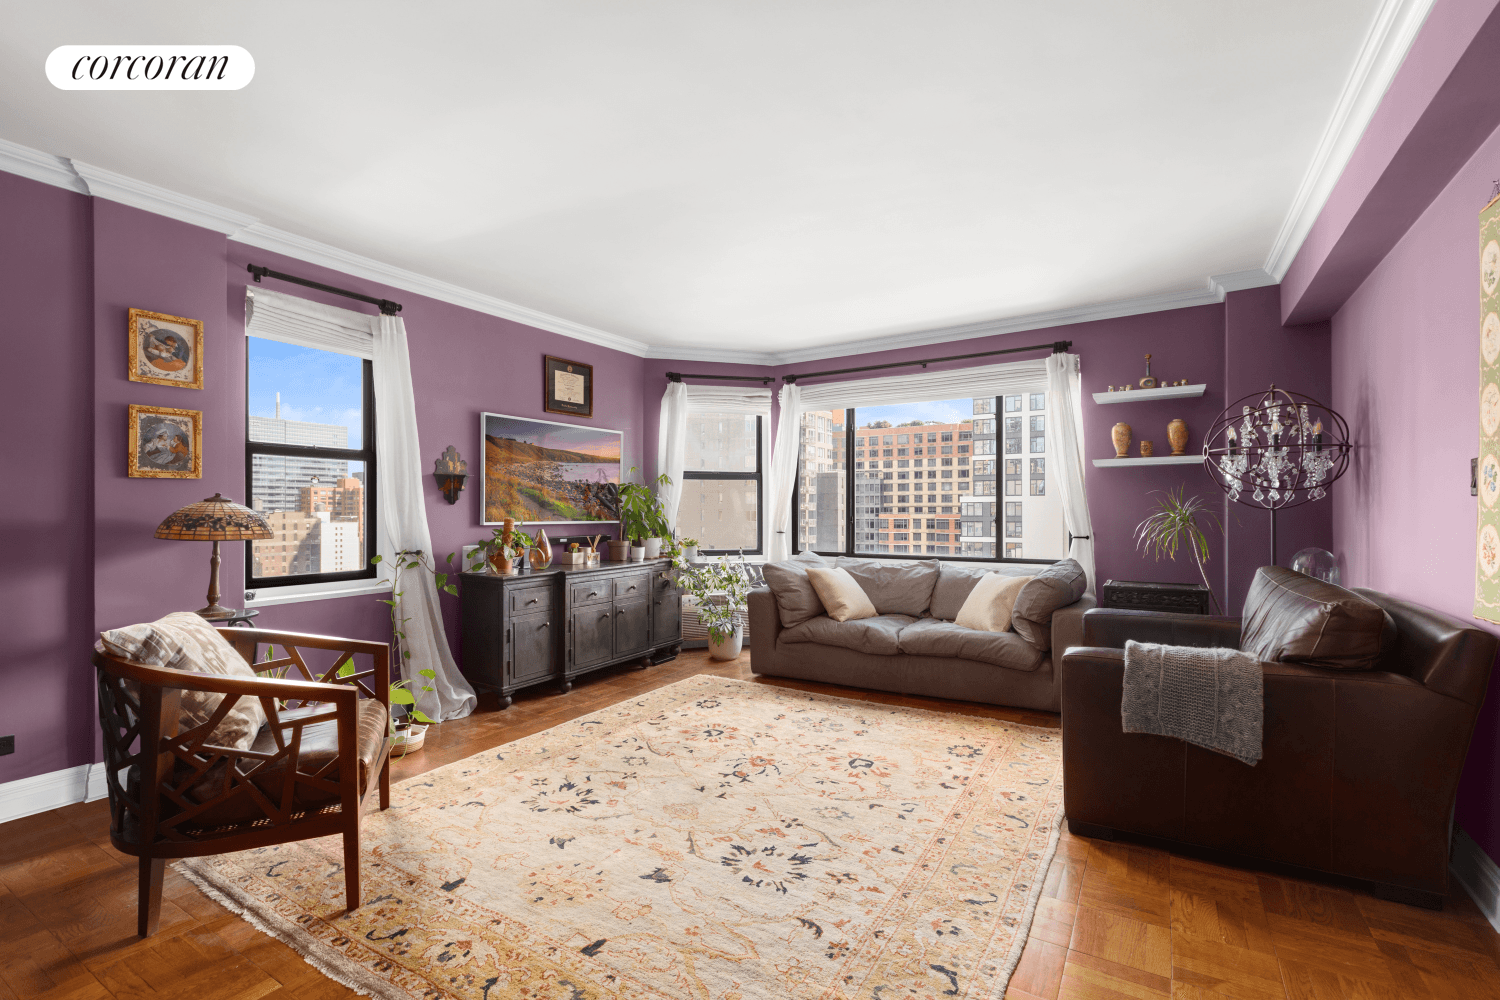 Located at 200 East 36th Street, a full service community in the heart of Murray Hill, this charming 1 bedroom, 1 bathroom home is beautifully and thoughtfully designed.